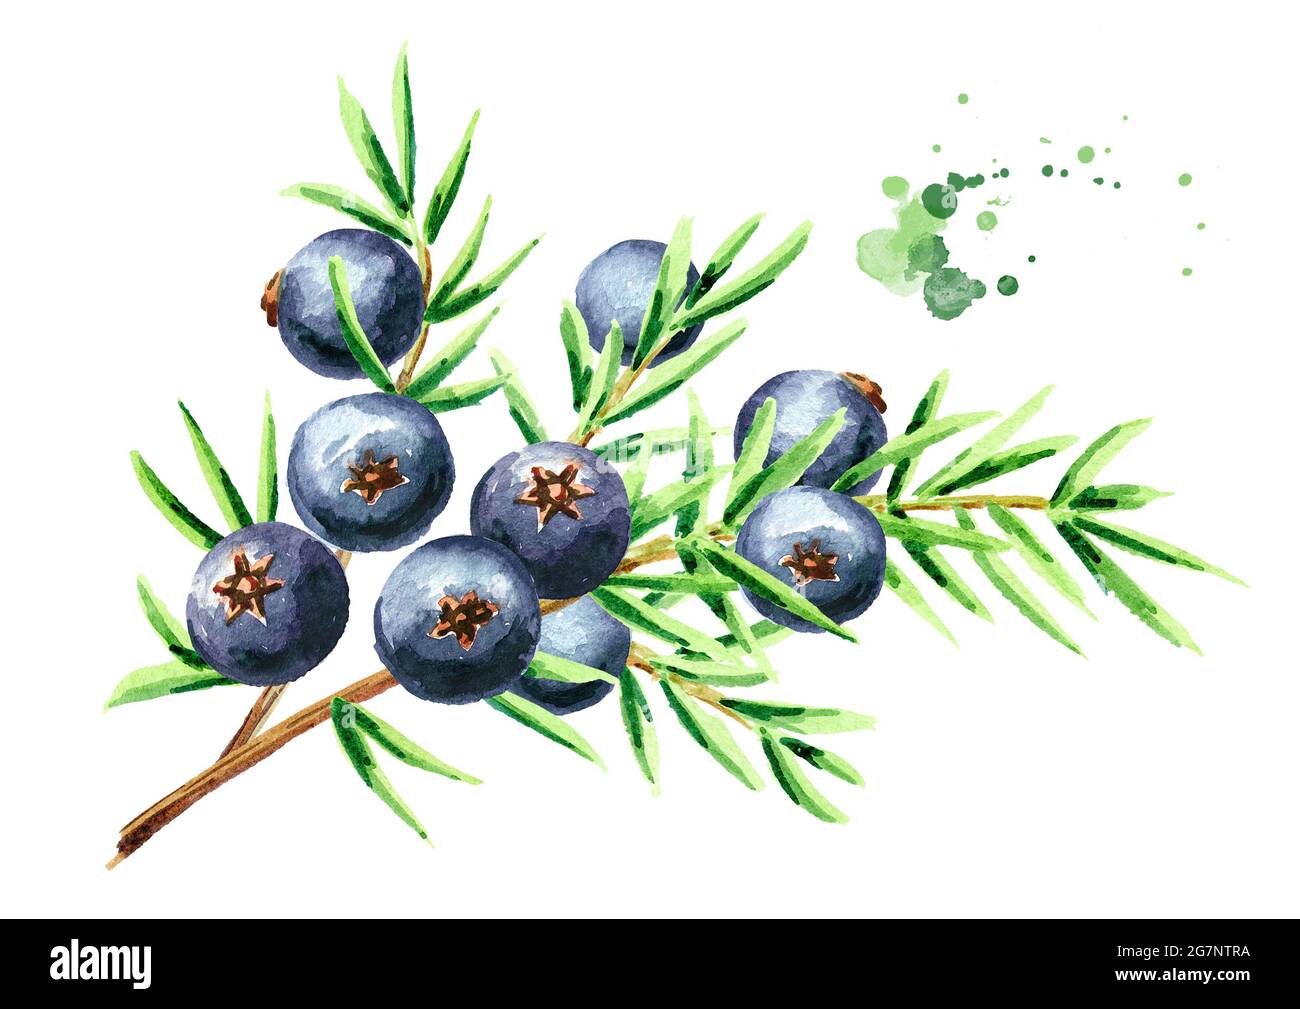 Juniper branch with berries. Watercolor hand drawn illustration ...